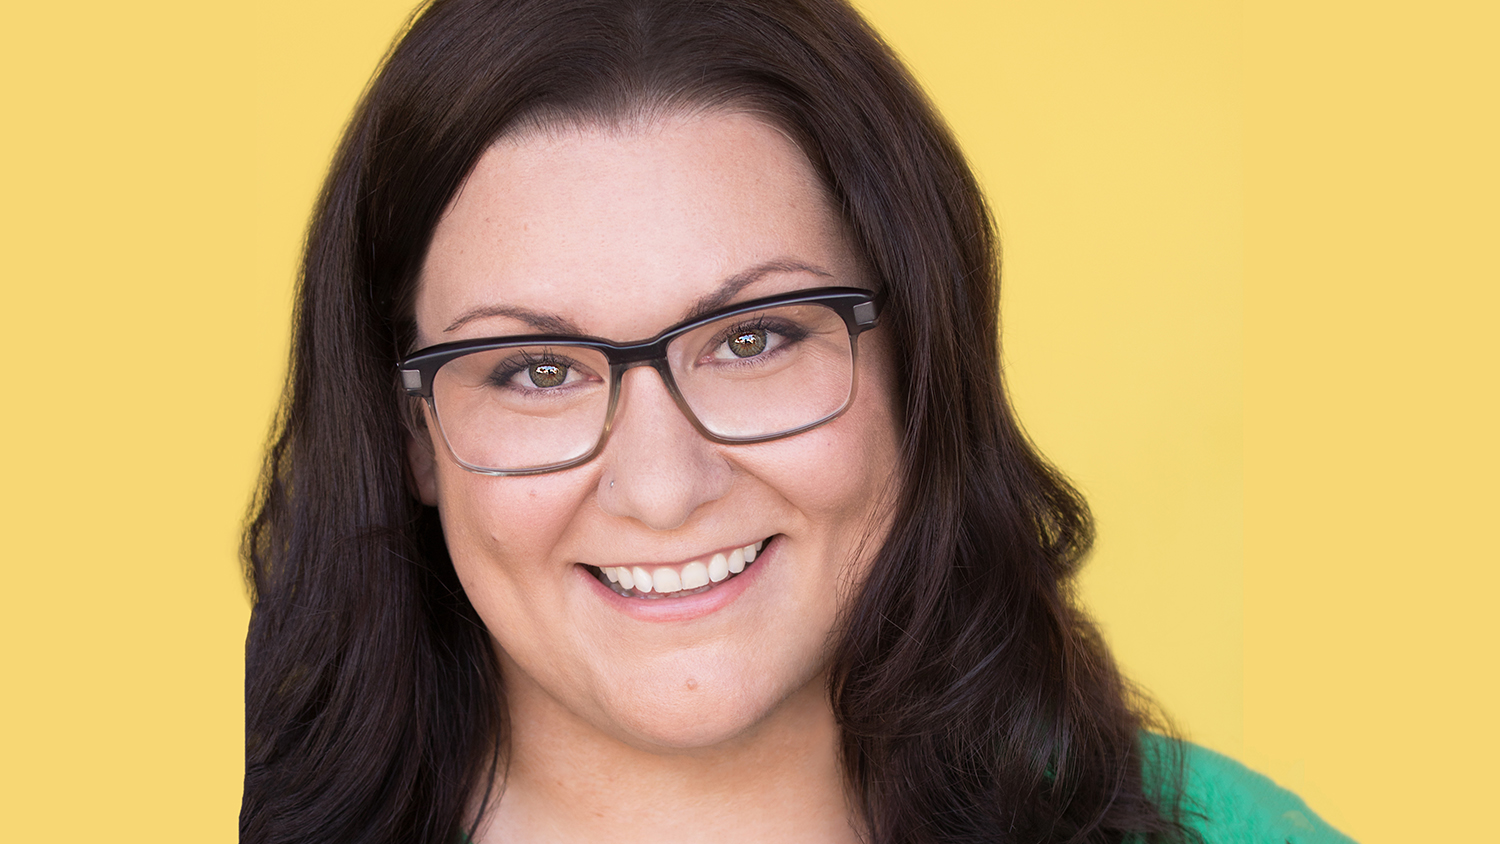 Jessi Campbell wearing glasses and smiling with a yellow background.